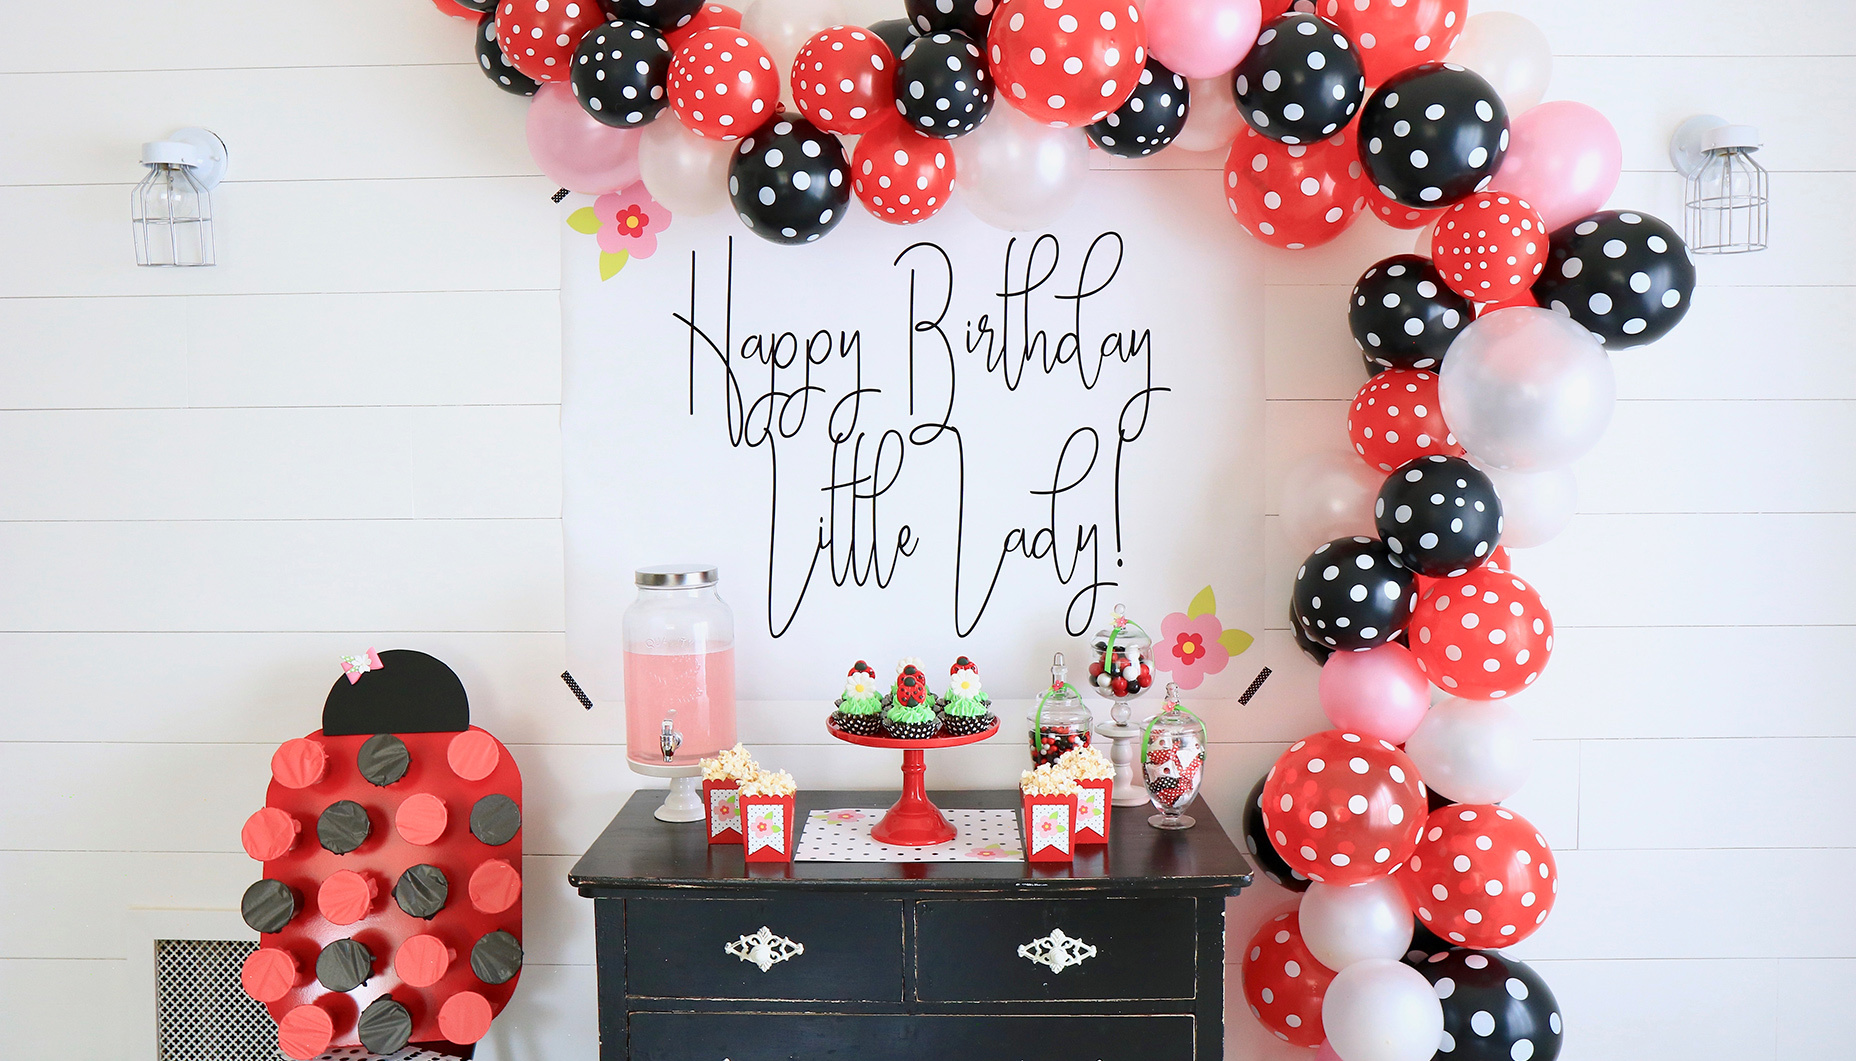 LadyBug Balloon Bouquet 1st Birthday Party Supplies Decorations Favors